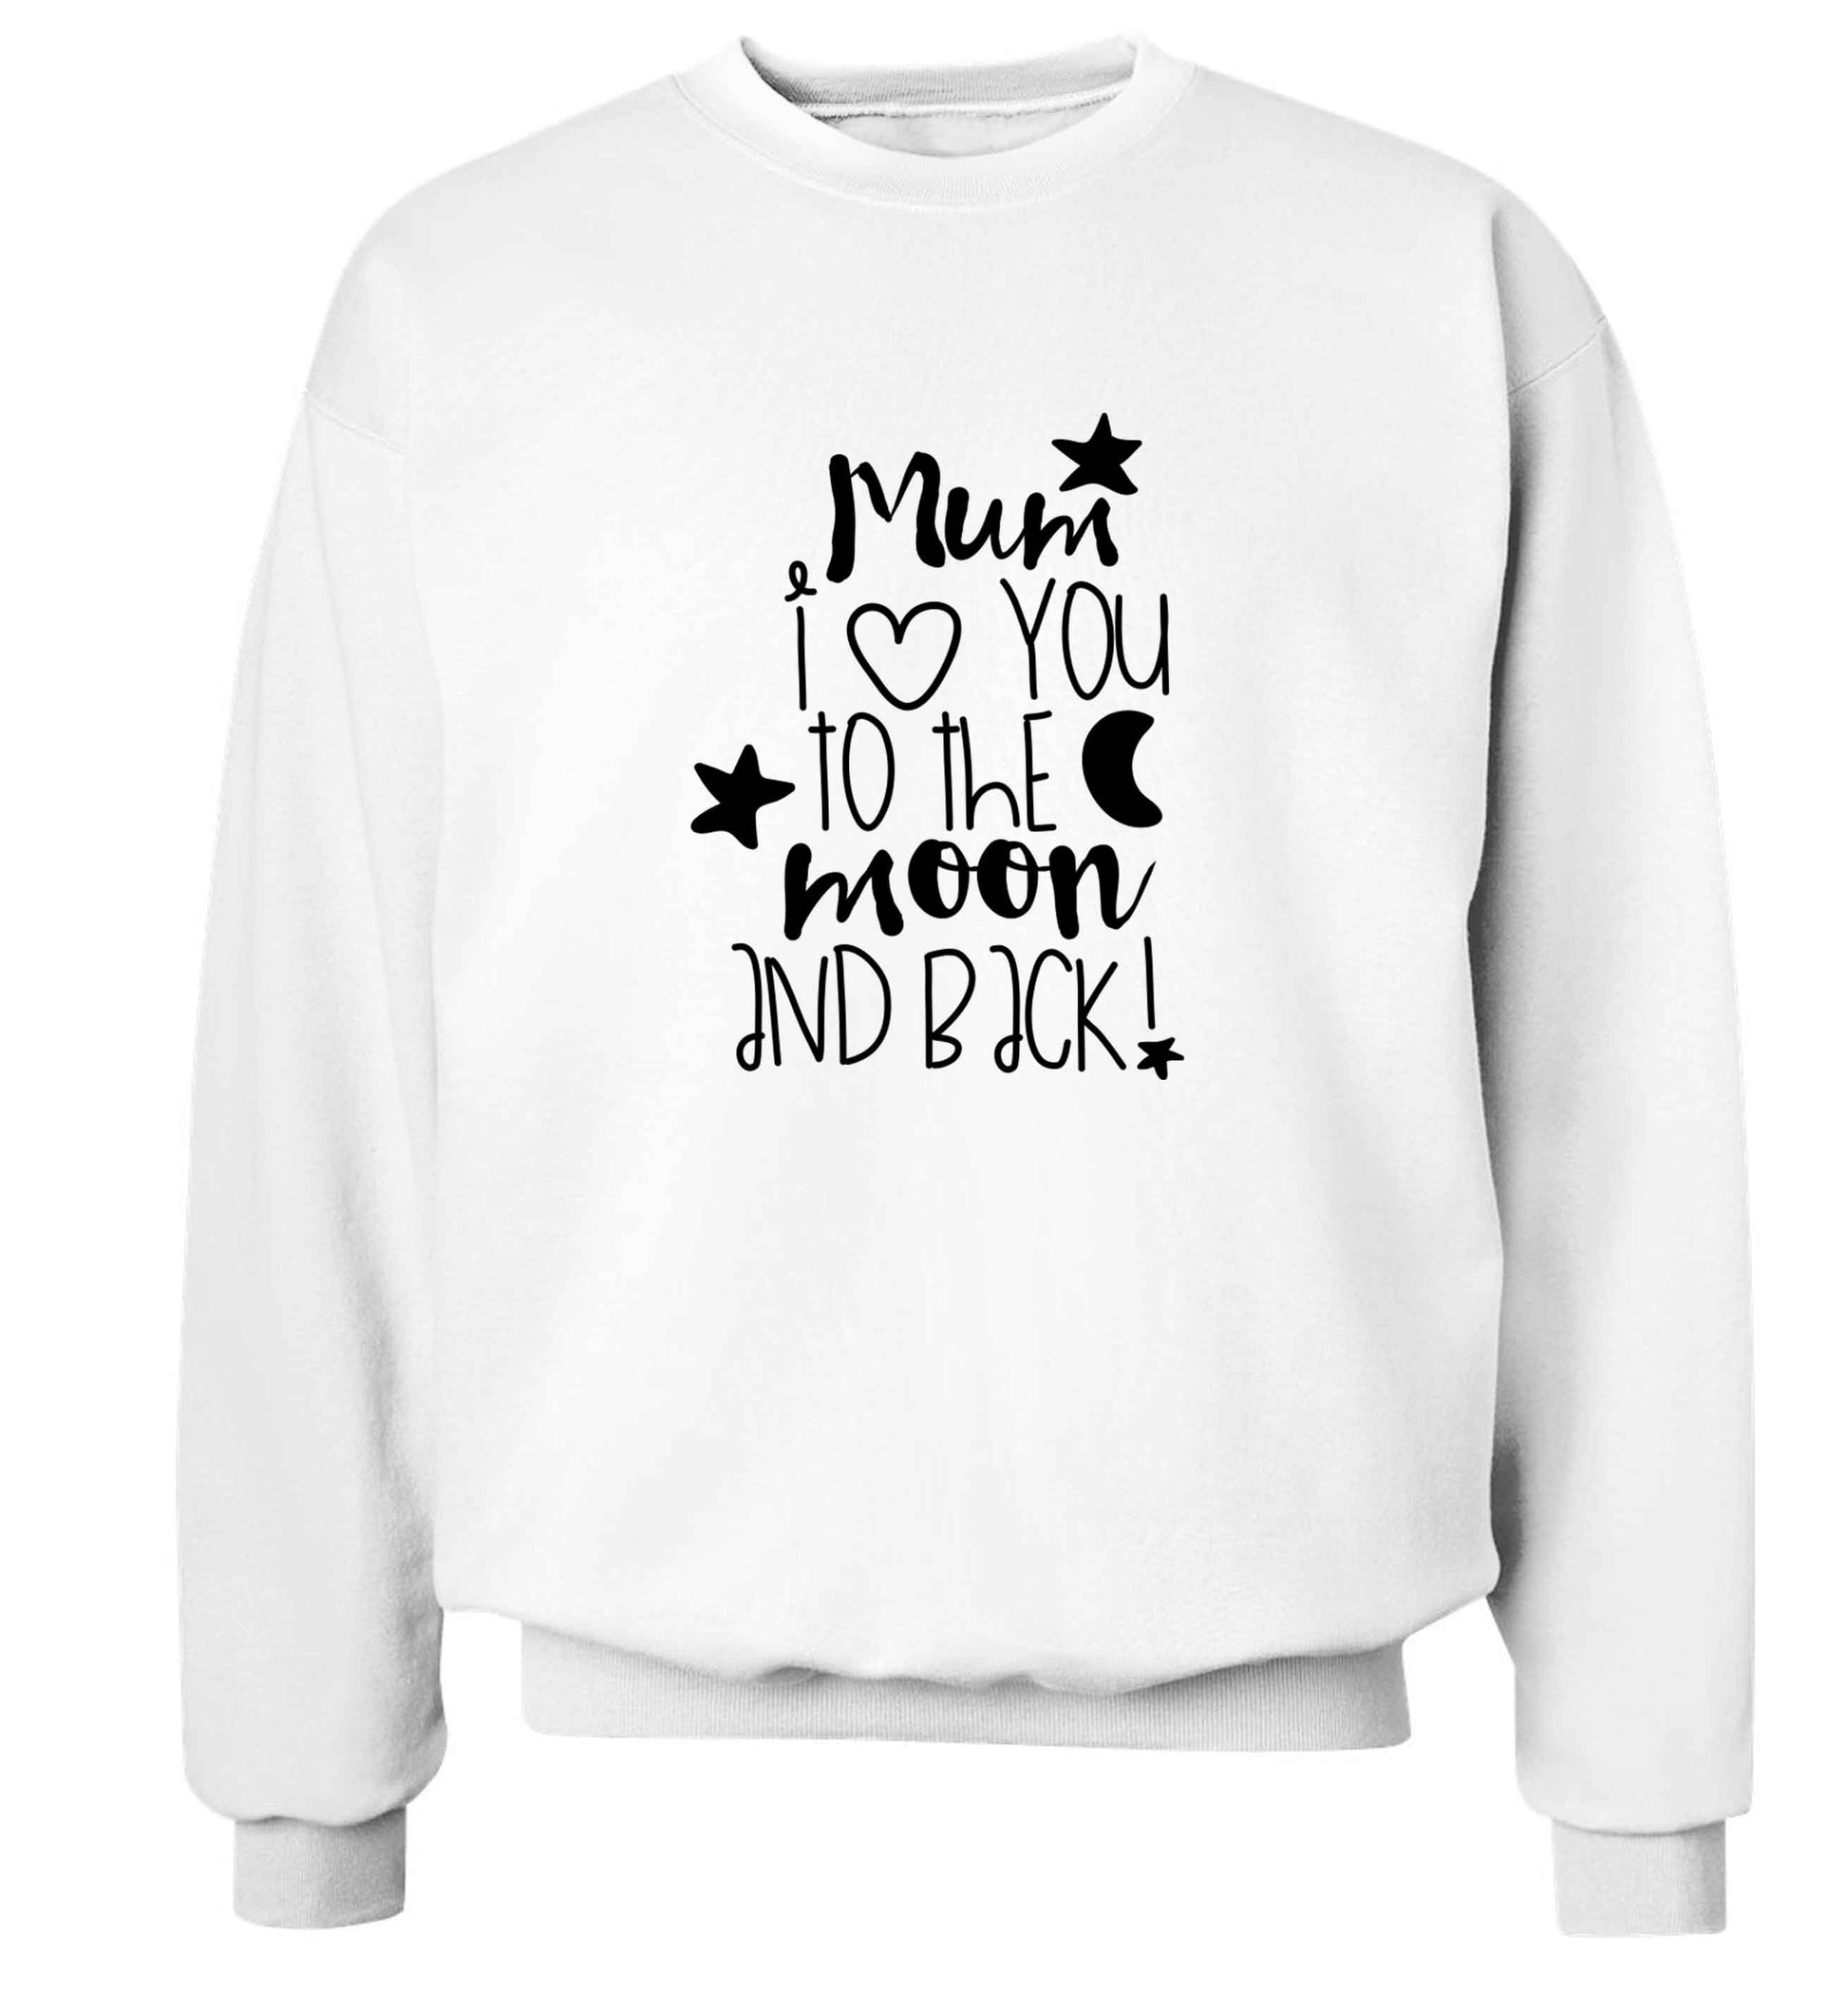 Mum I love you to the moon and back adult's unisex white sweater 2XL